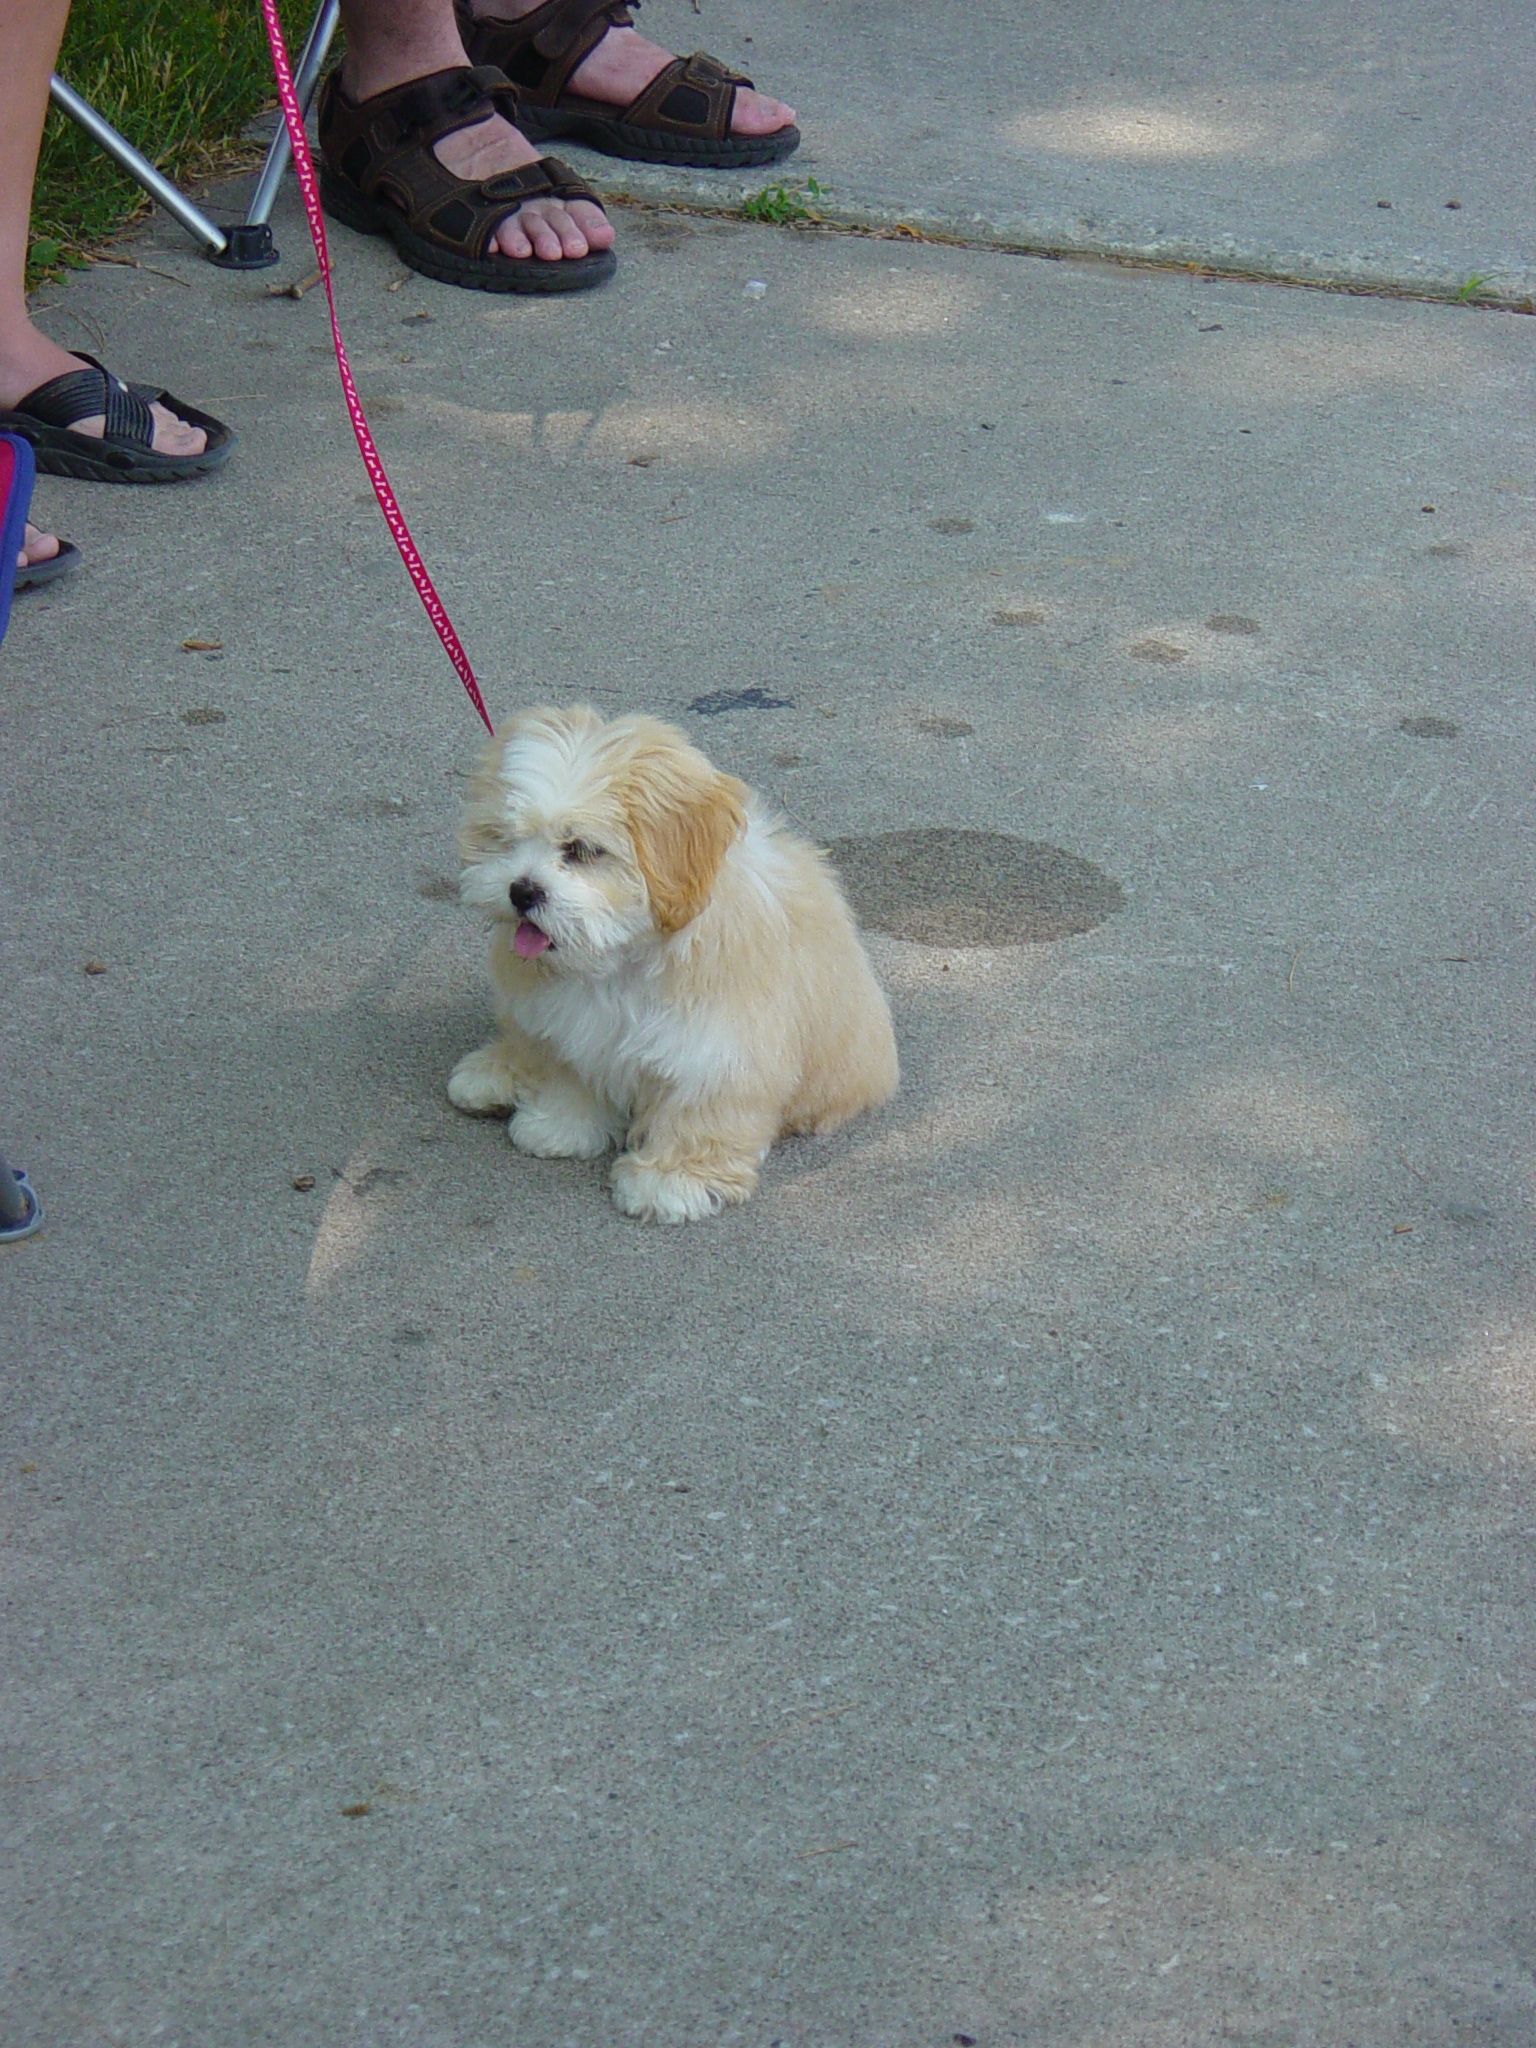 Cute puppy.  I tried and tried to get a good shot of it.